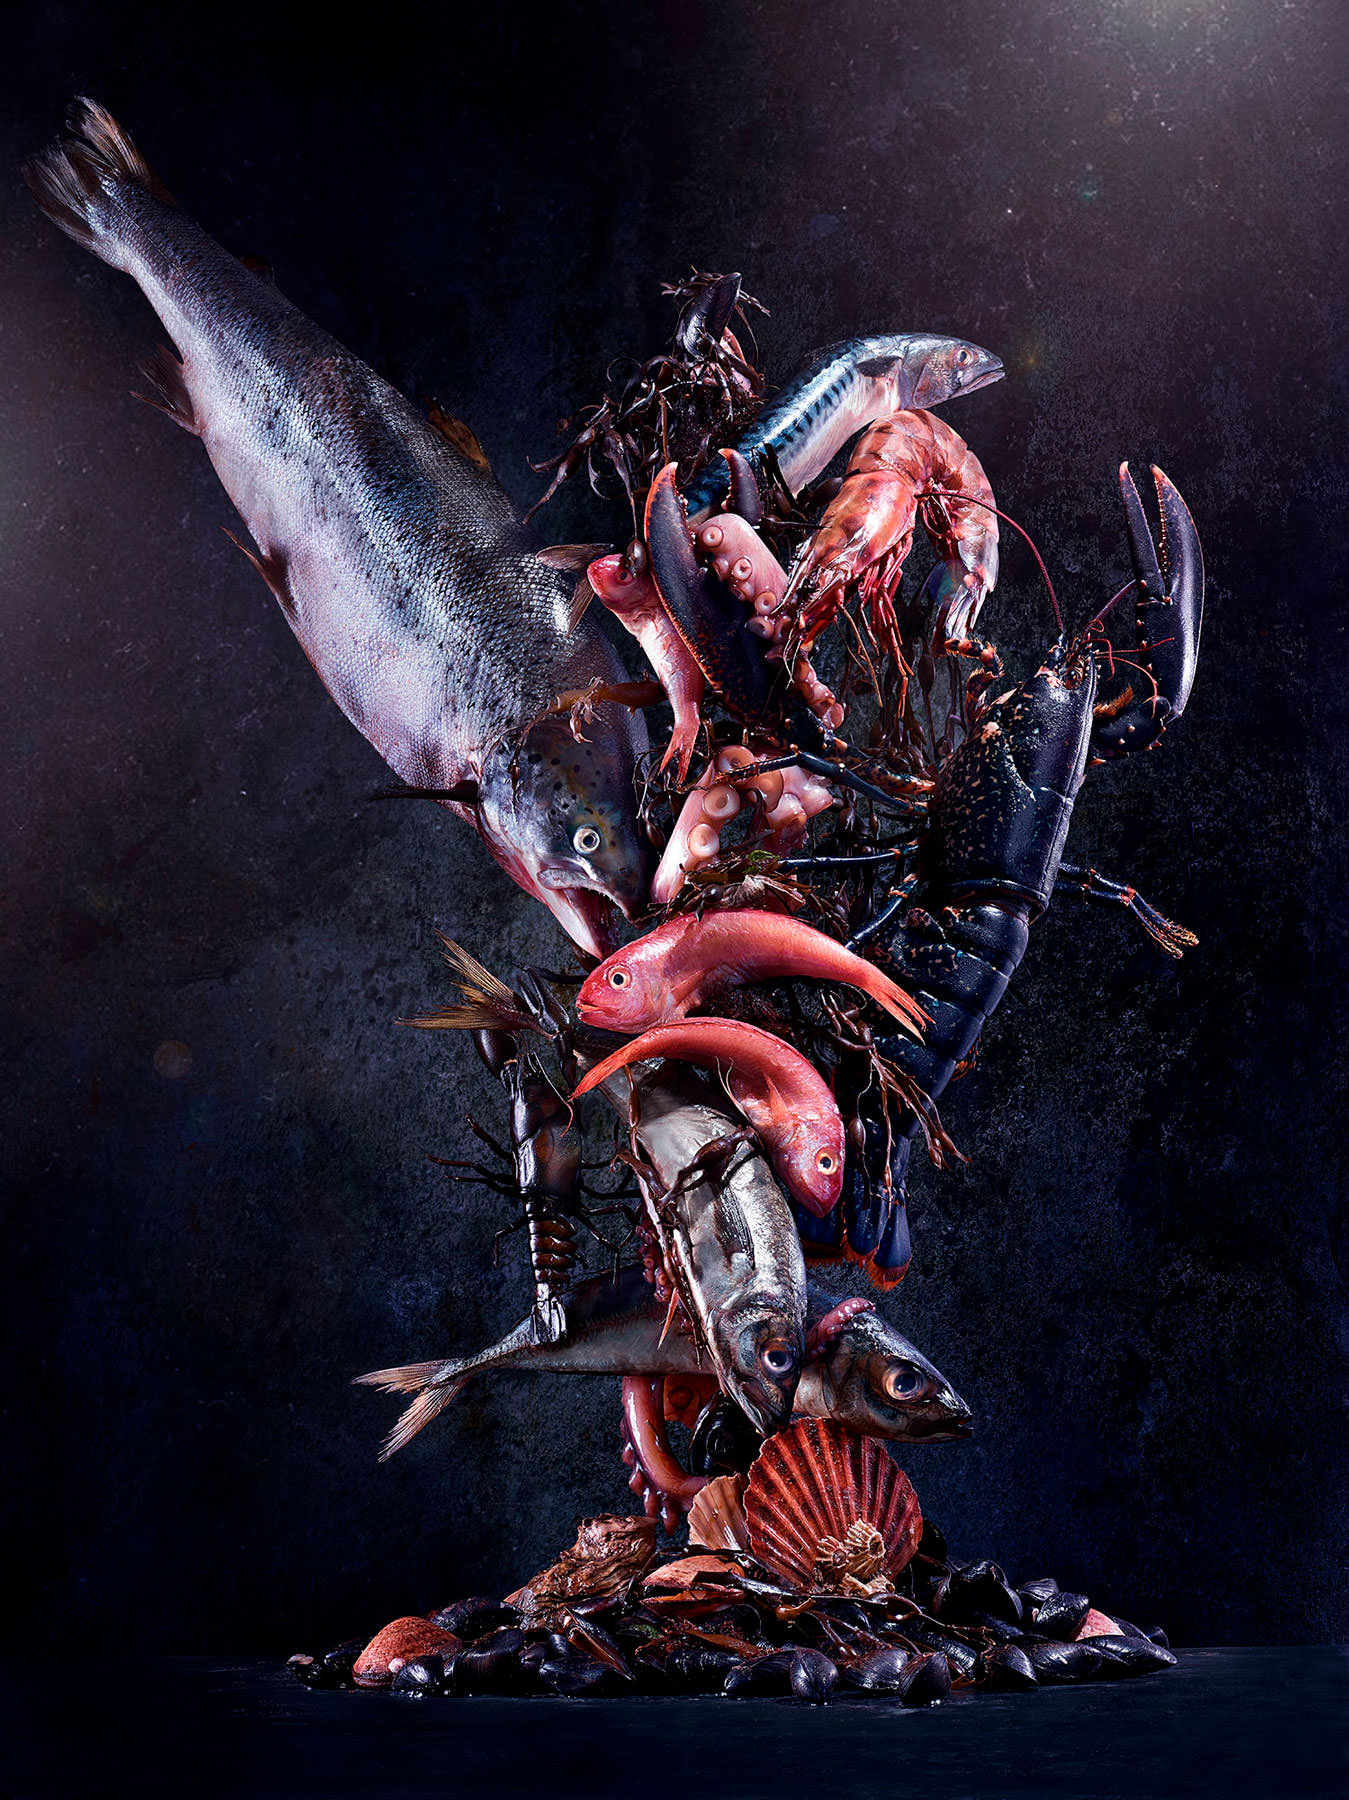 sculpture made of seafood on a black dark backdrop - London Food & Drinks Photographer